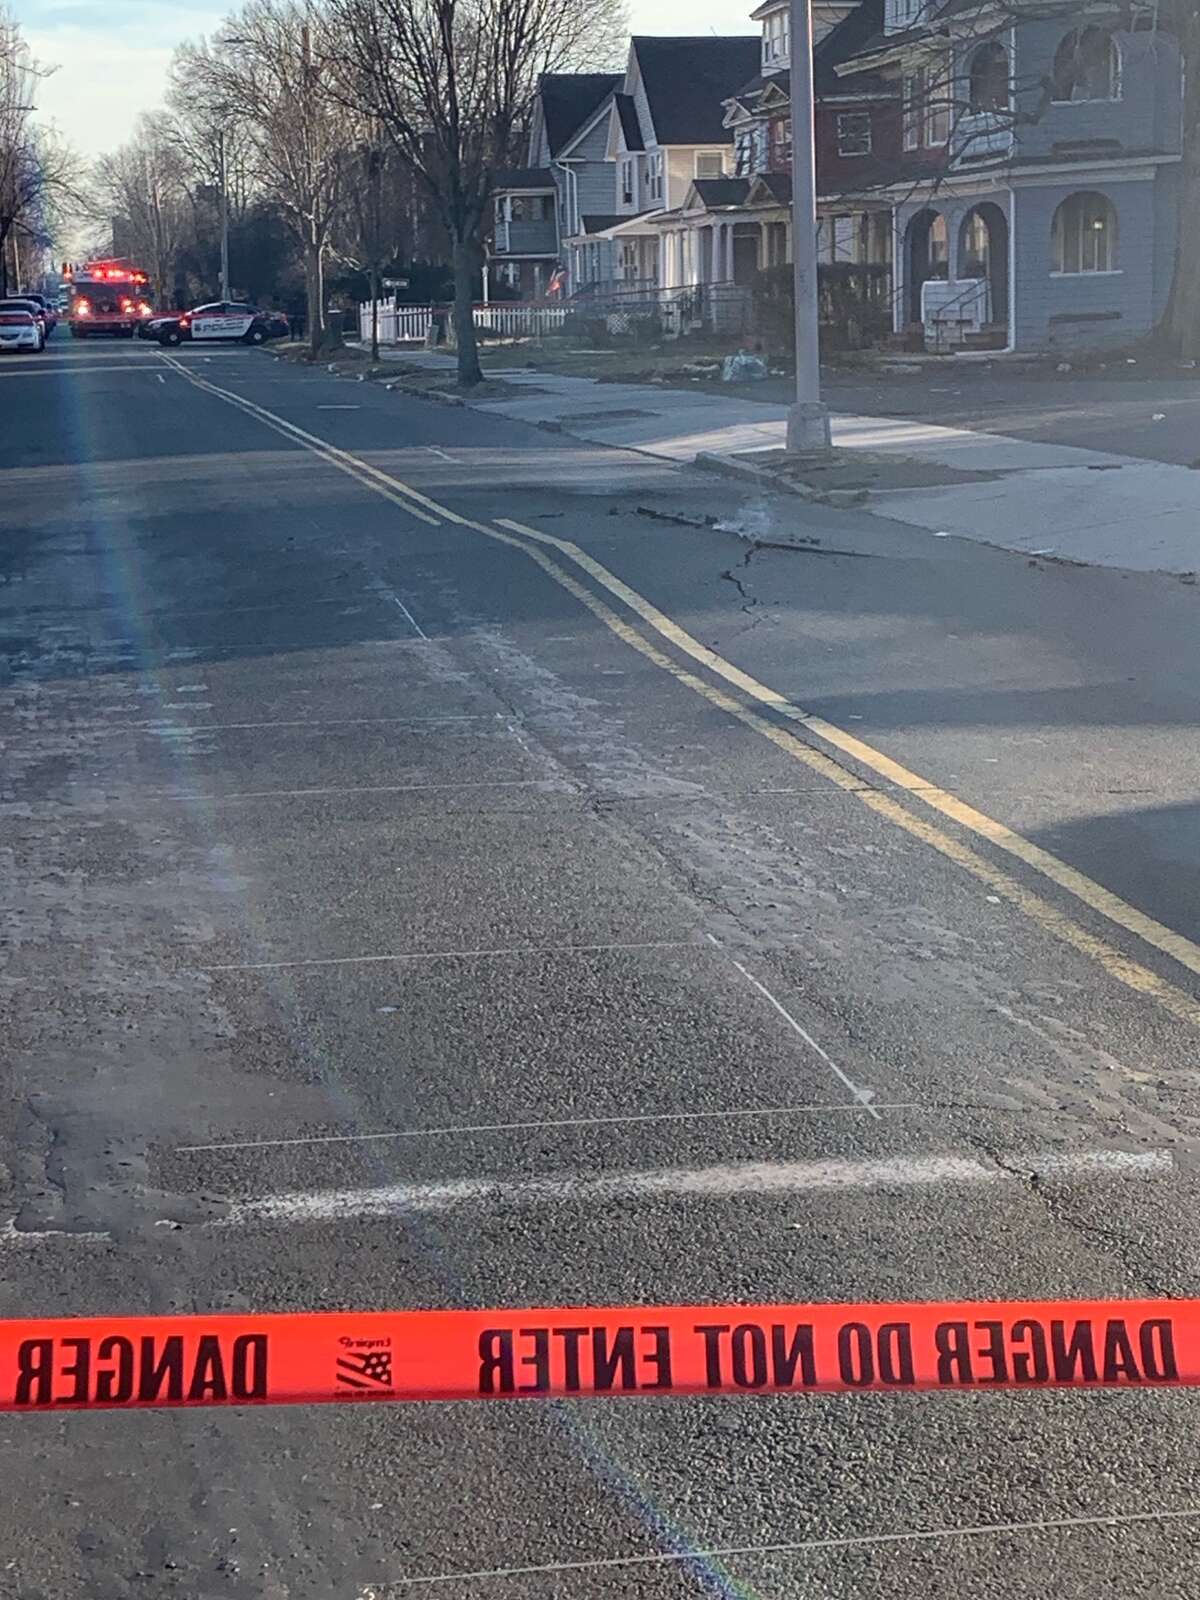 Two Farmington Avenue establishments lost power Thursday after an underground fire and a resulting water main break closed the roadway that afternoon, according to Hartford fire officials.